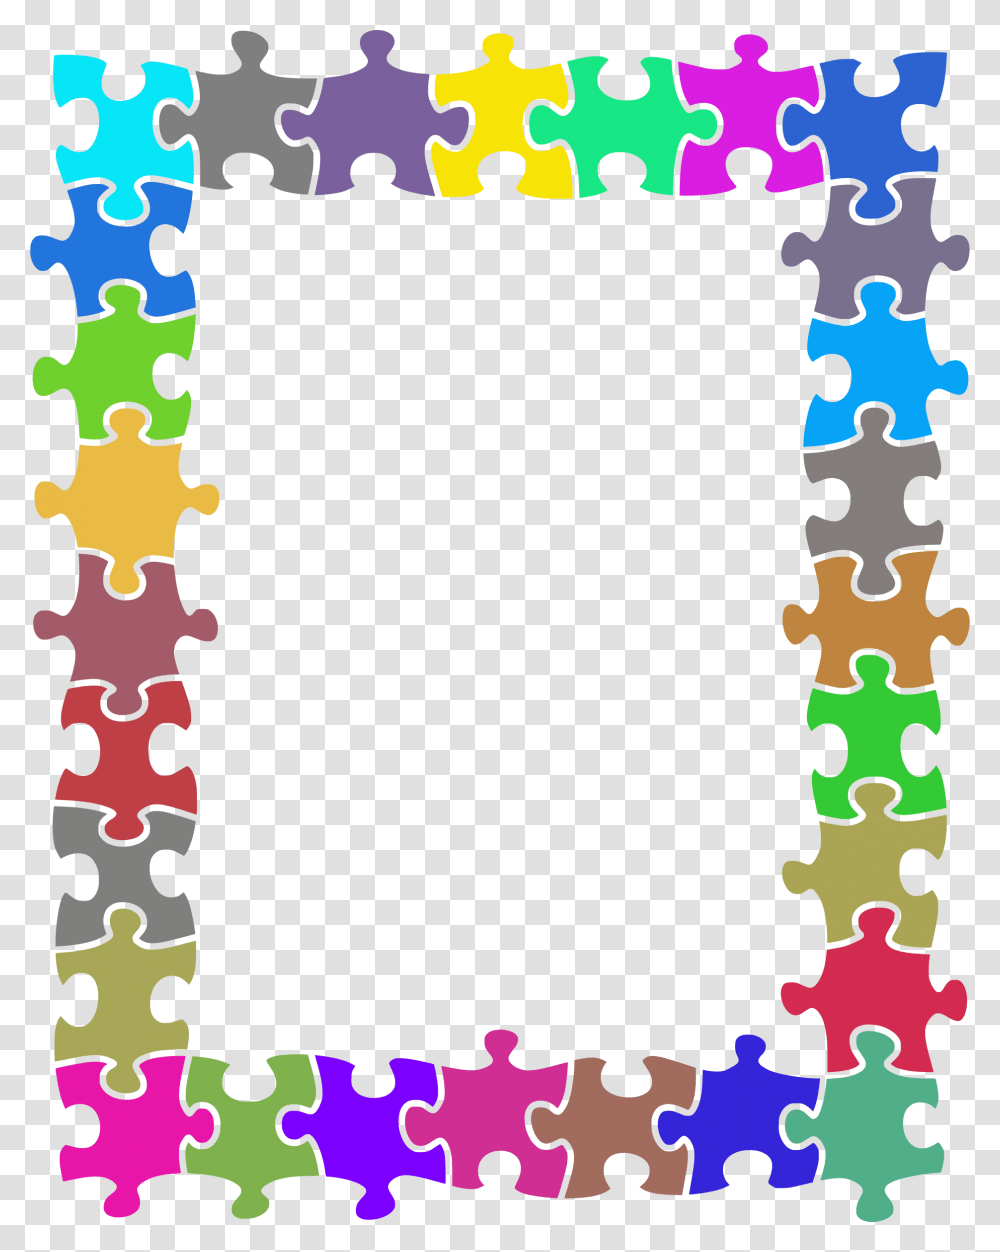 Puzzle Piece Frame Clipart Download Puzzle Piece Frame, Jigsaw Puzzle, Game, Poster Transparent Png